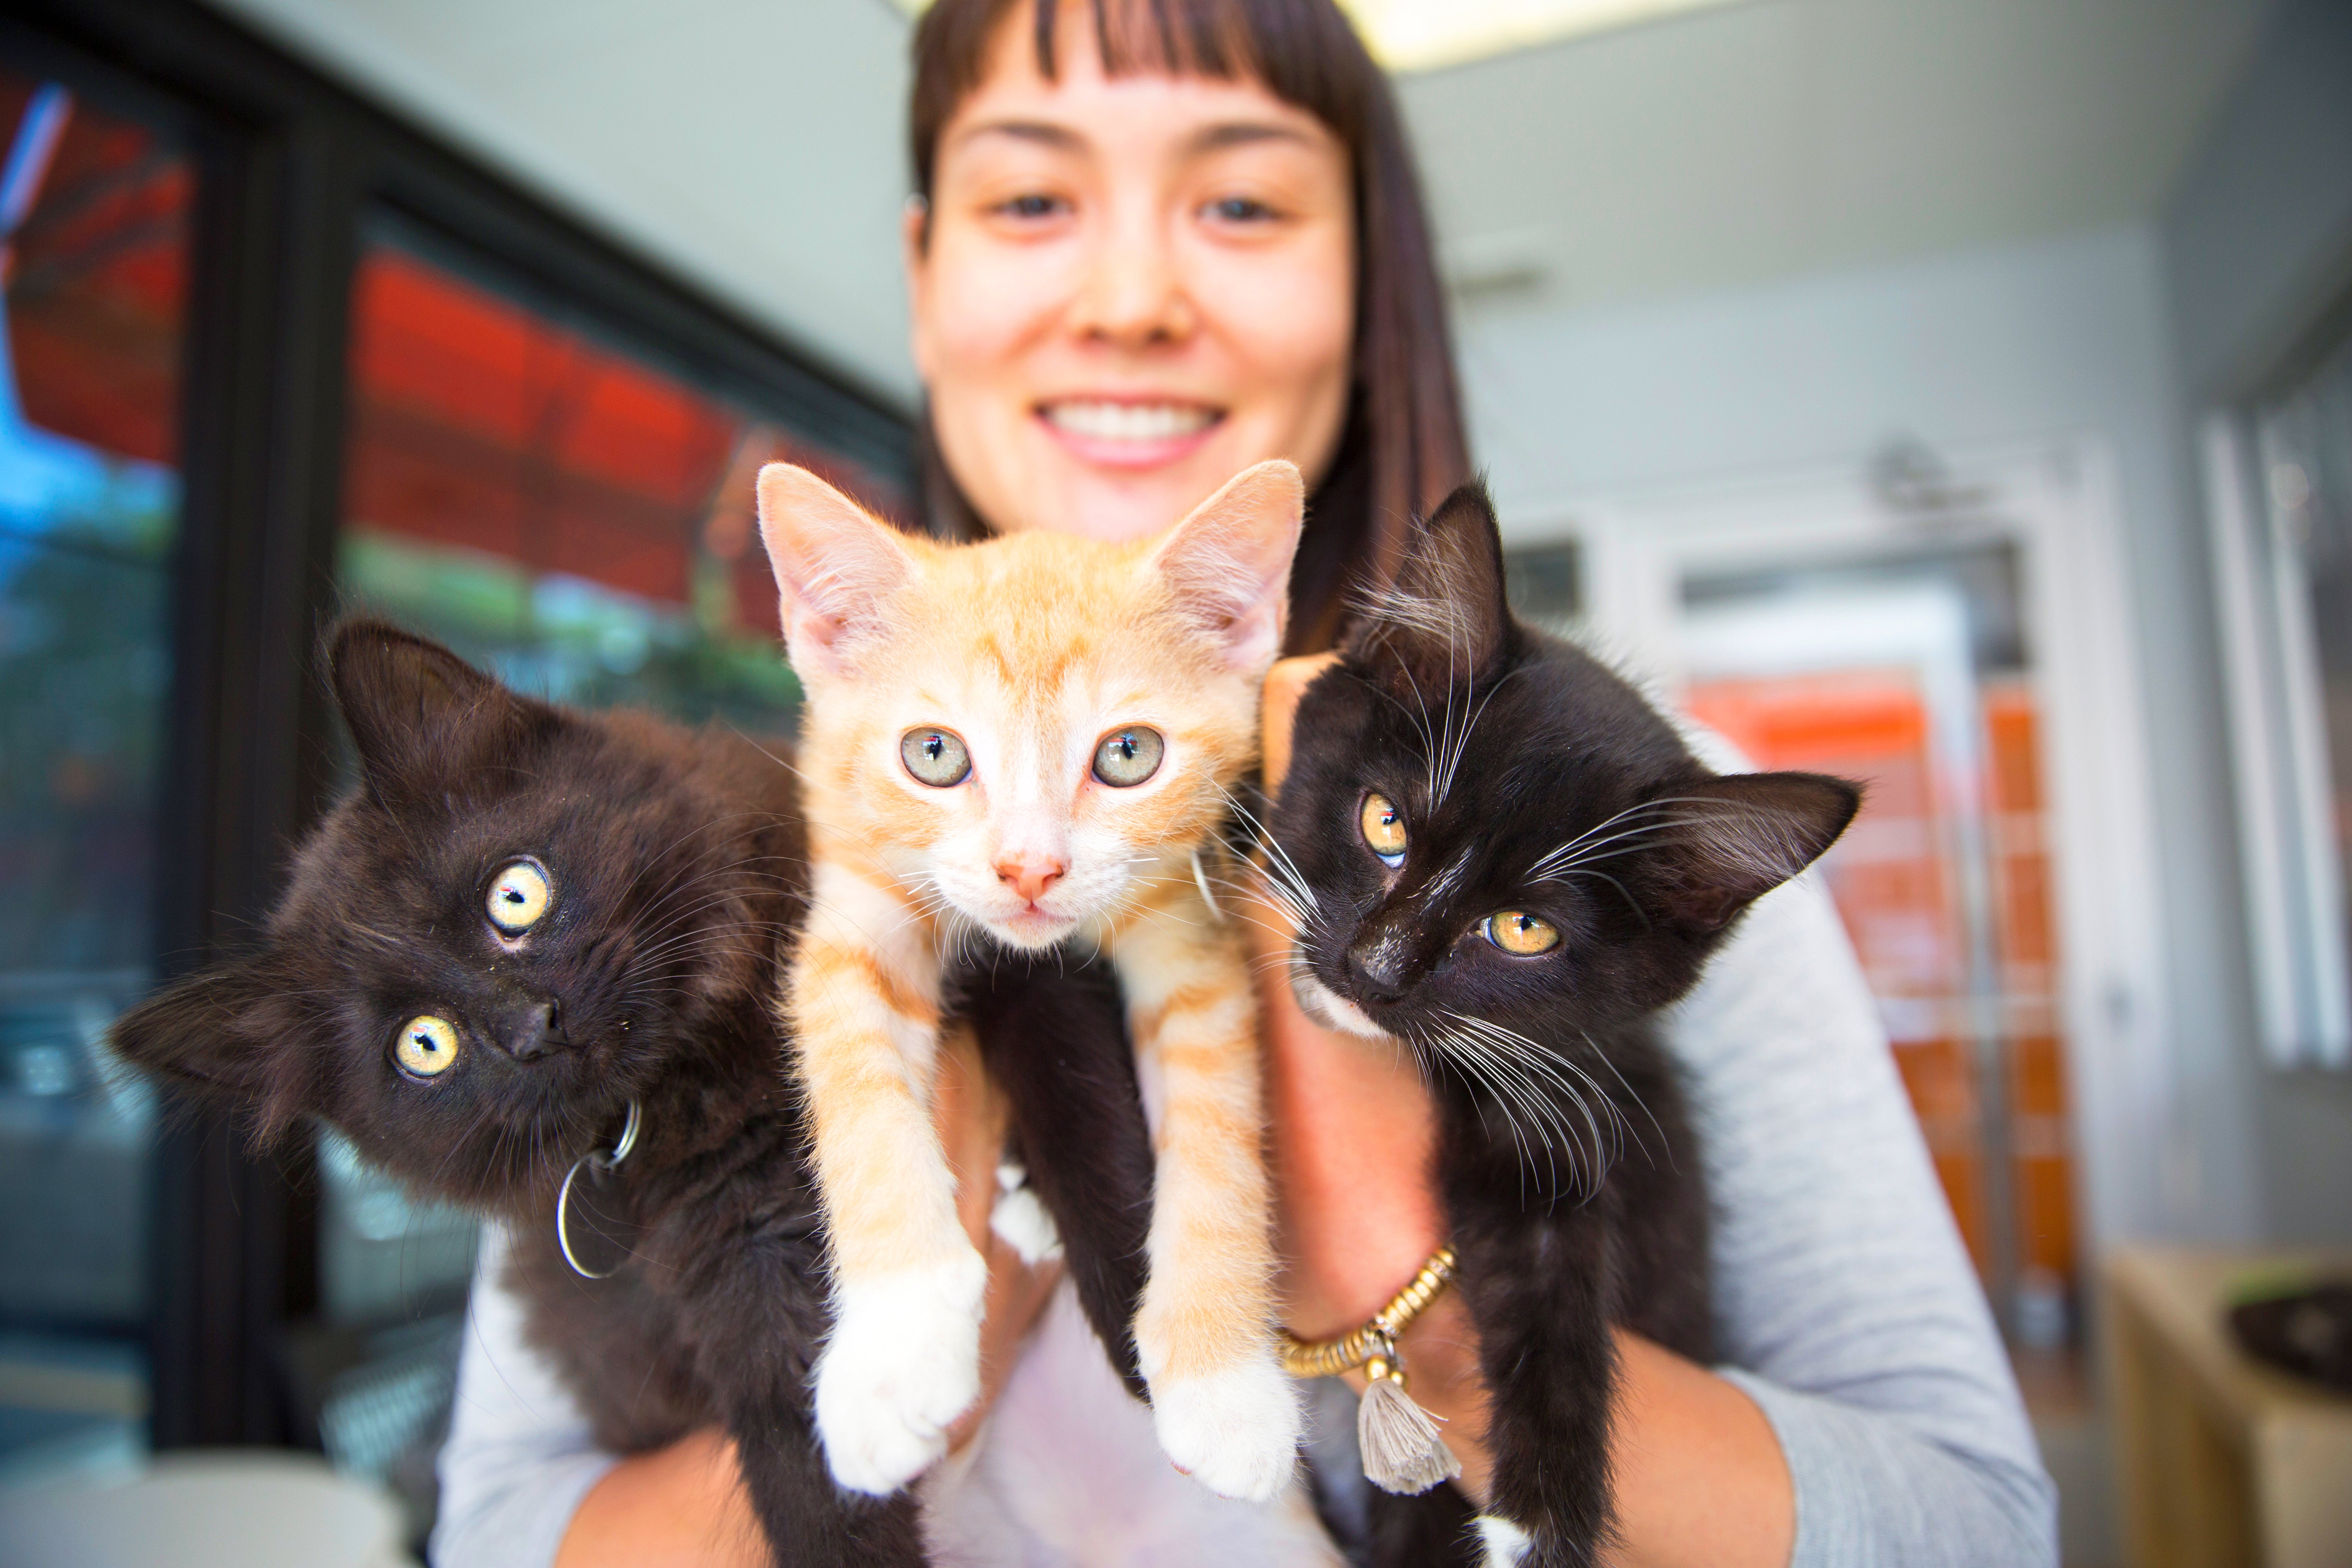 Smiling person holding three kittens in their hands